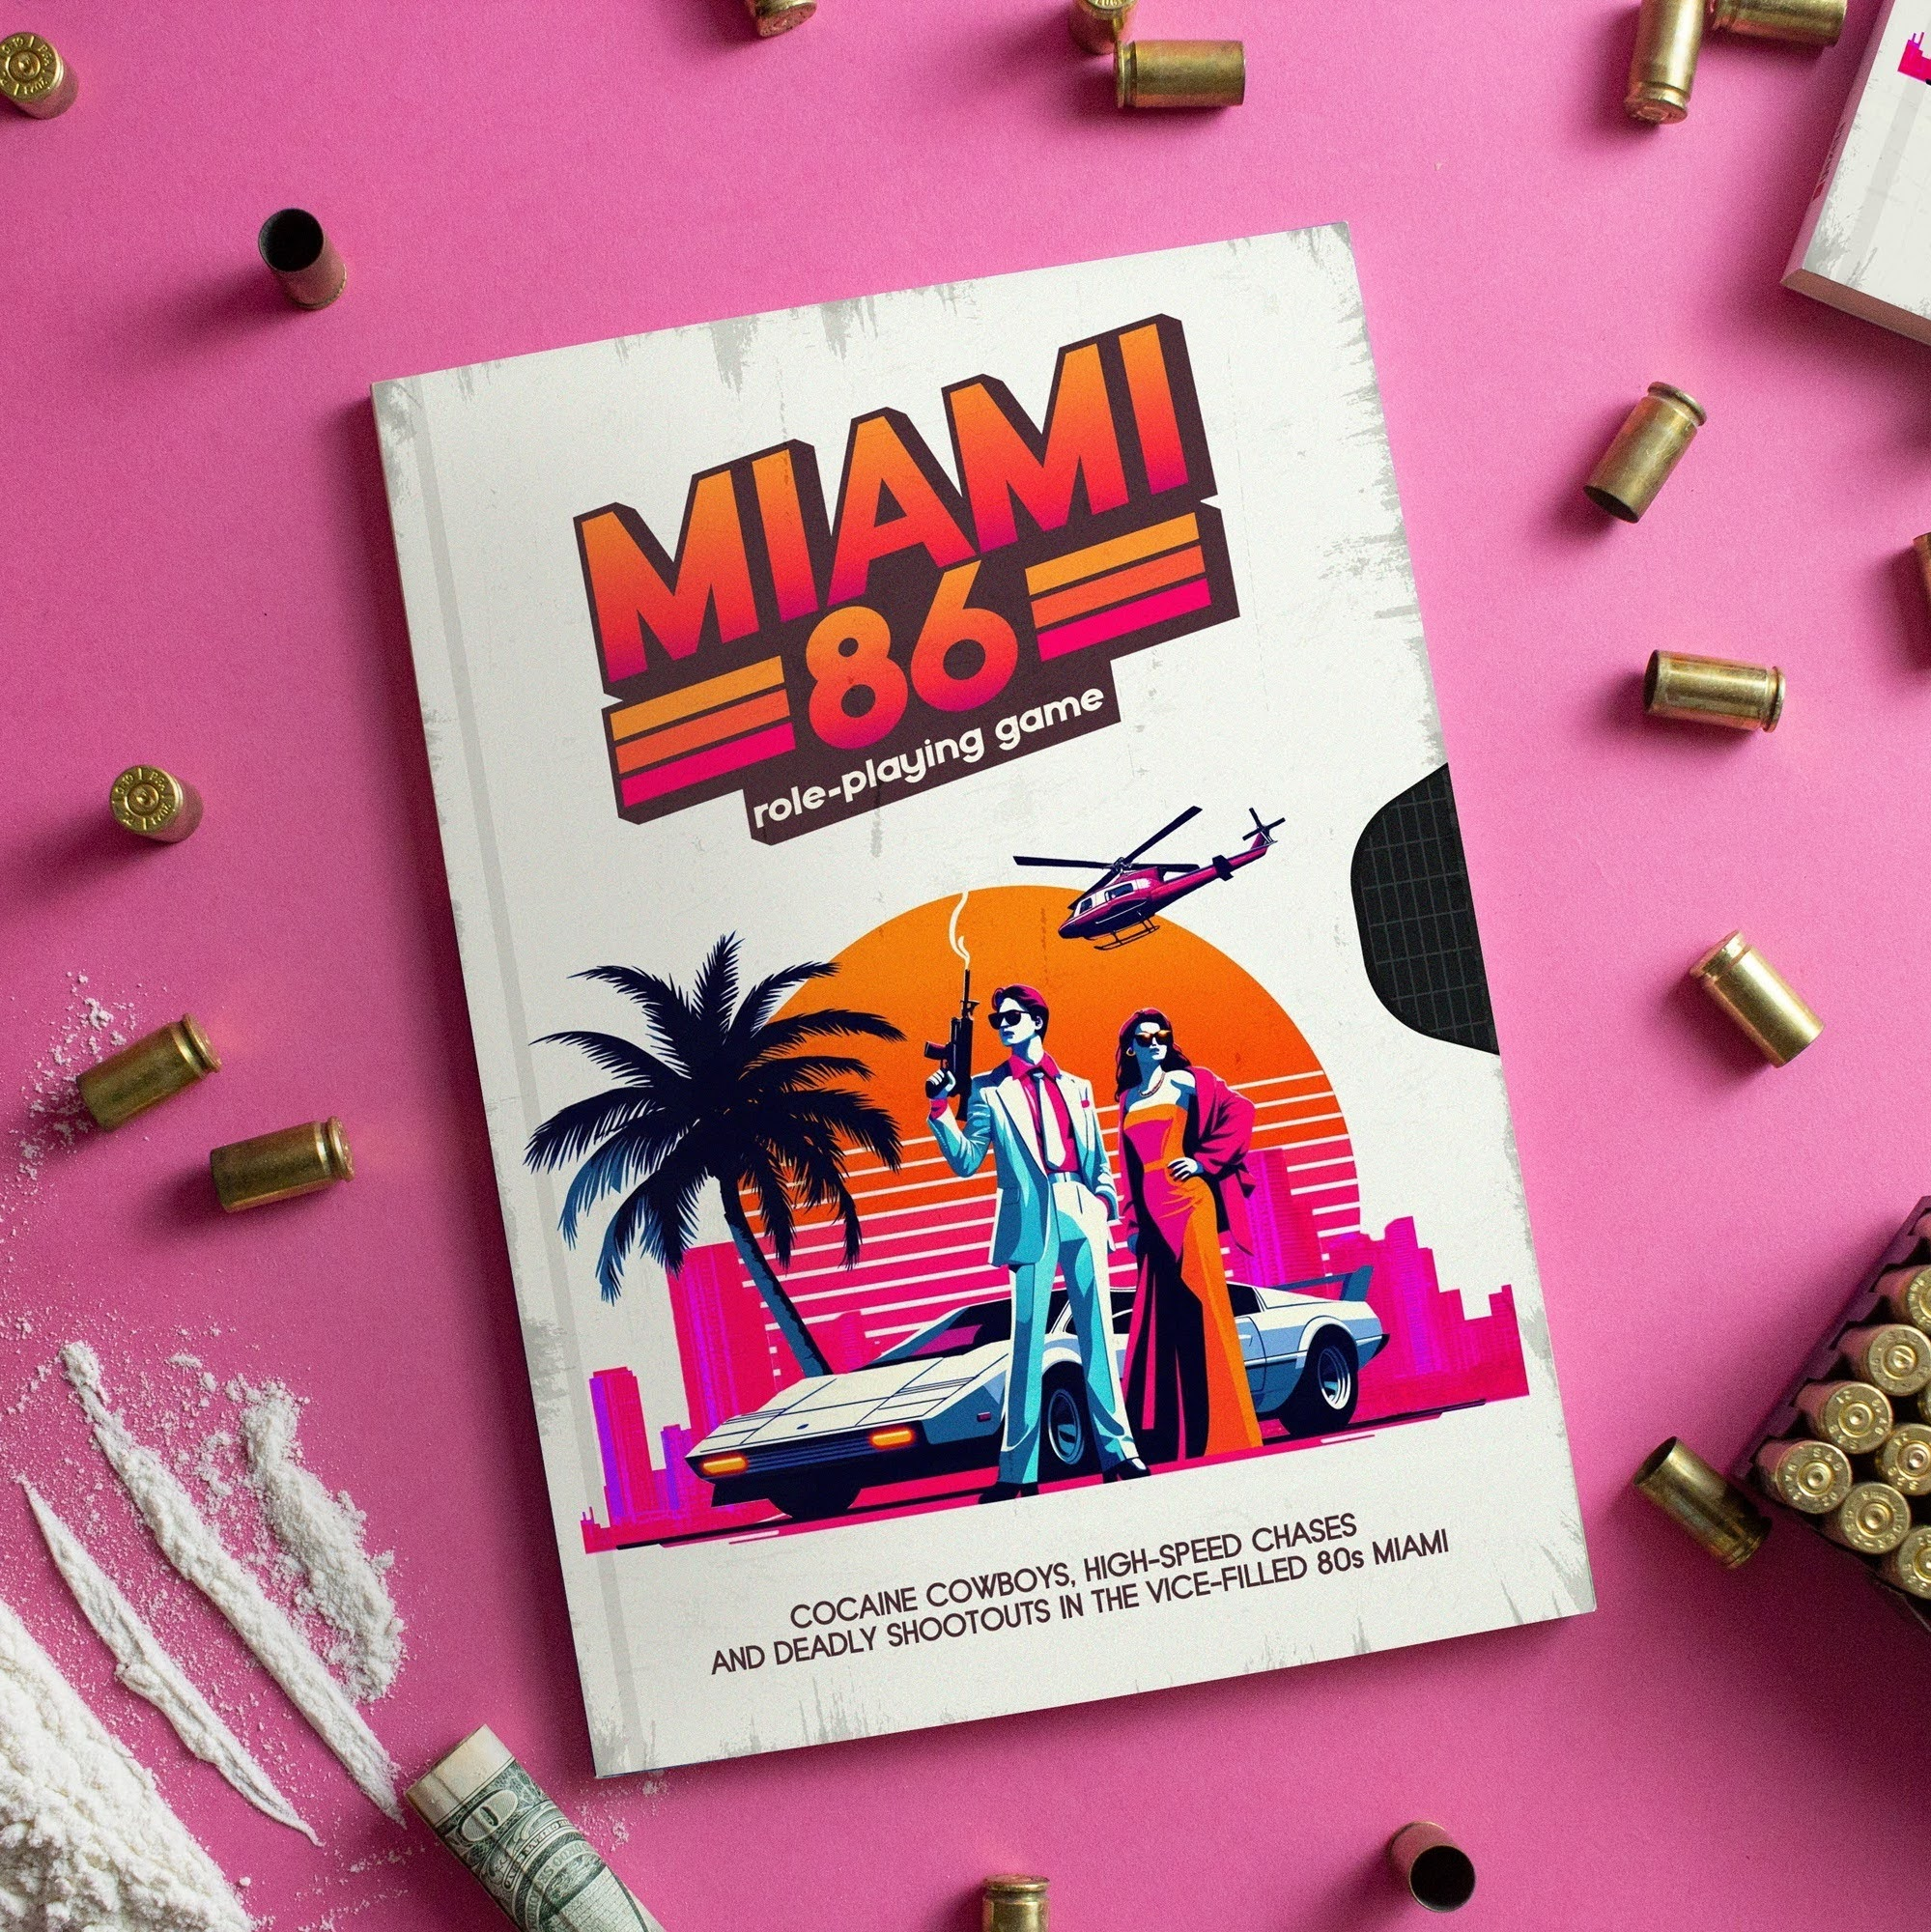 Miami 86 RPG: Upcoming TTRPG Inspired by Miami Vice, Scarface, and Vice City